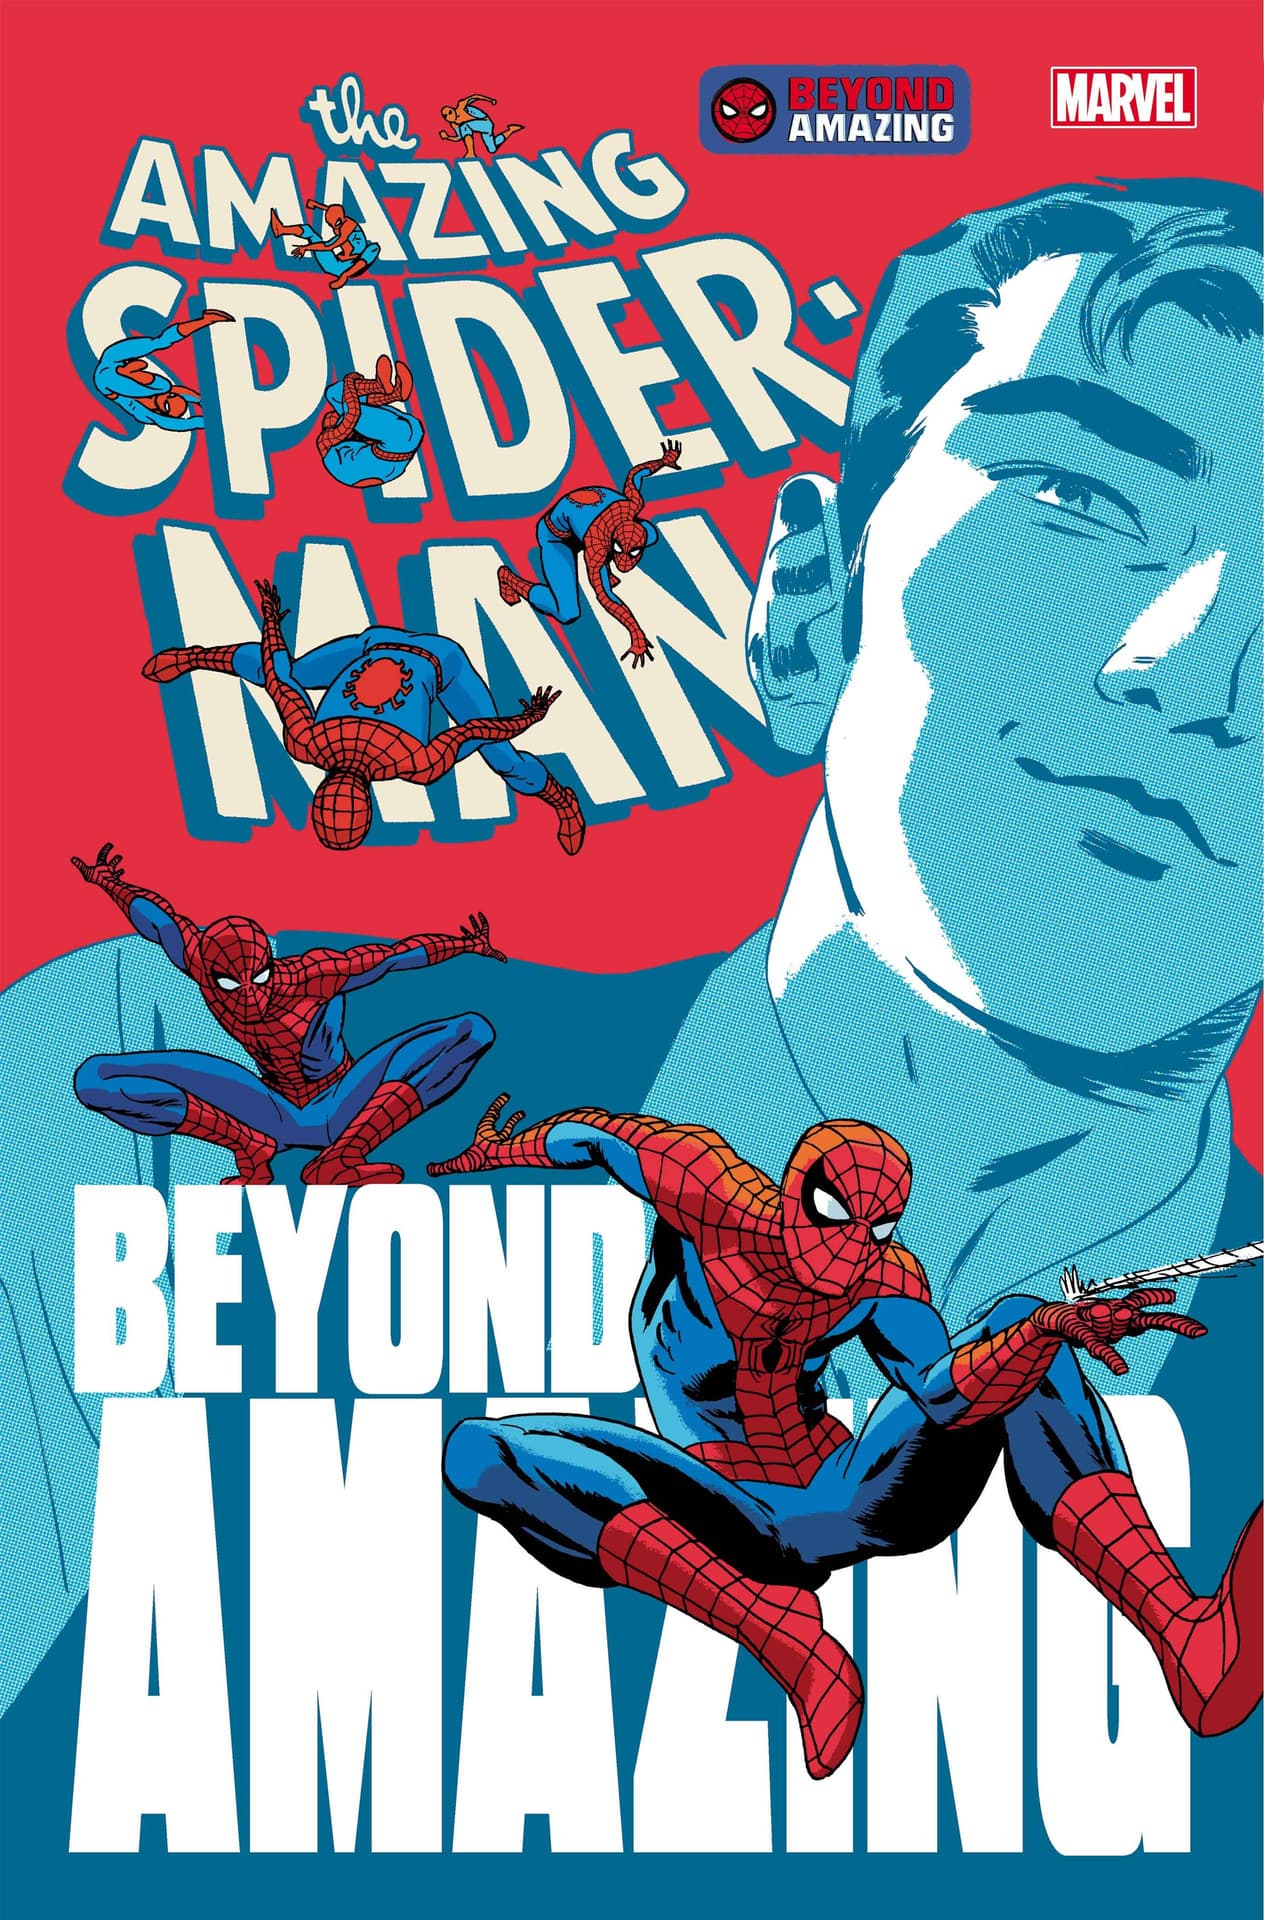 AMAZING SPIDER-MAN #10 Beyond Amazing Variant Cover by Marcos Martin